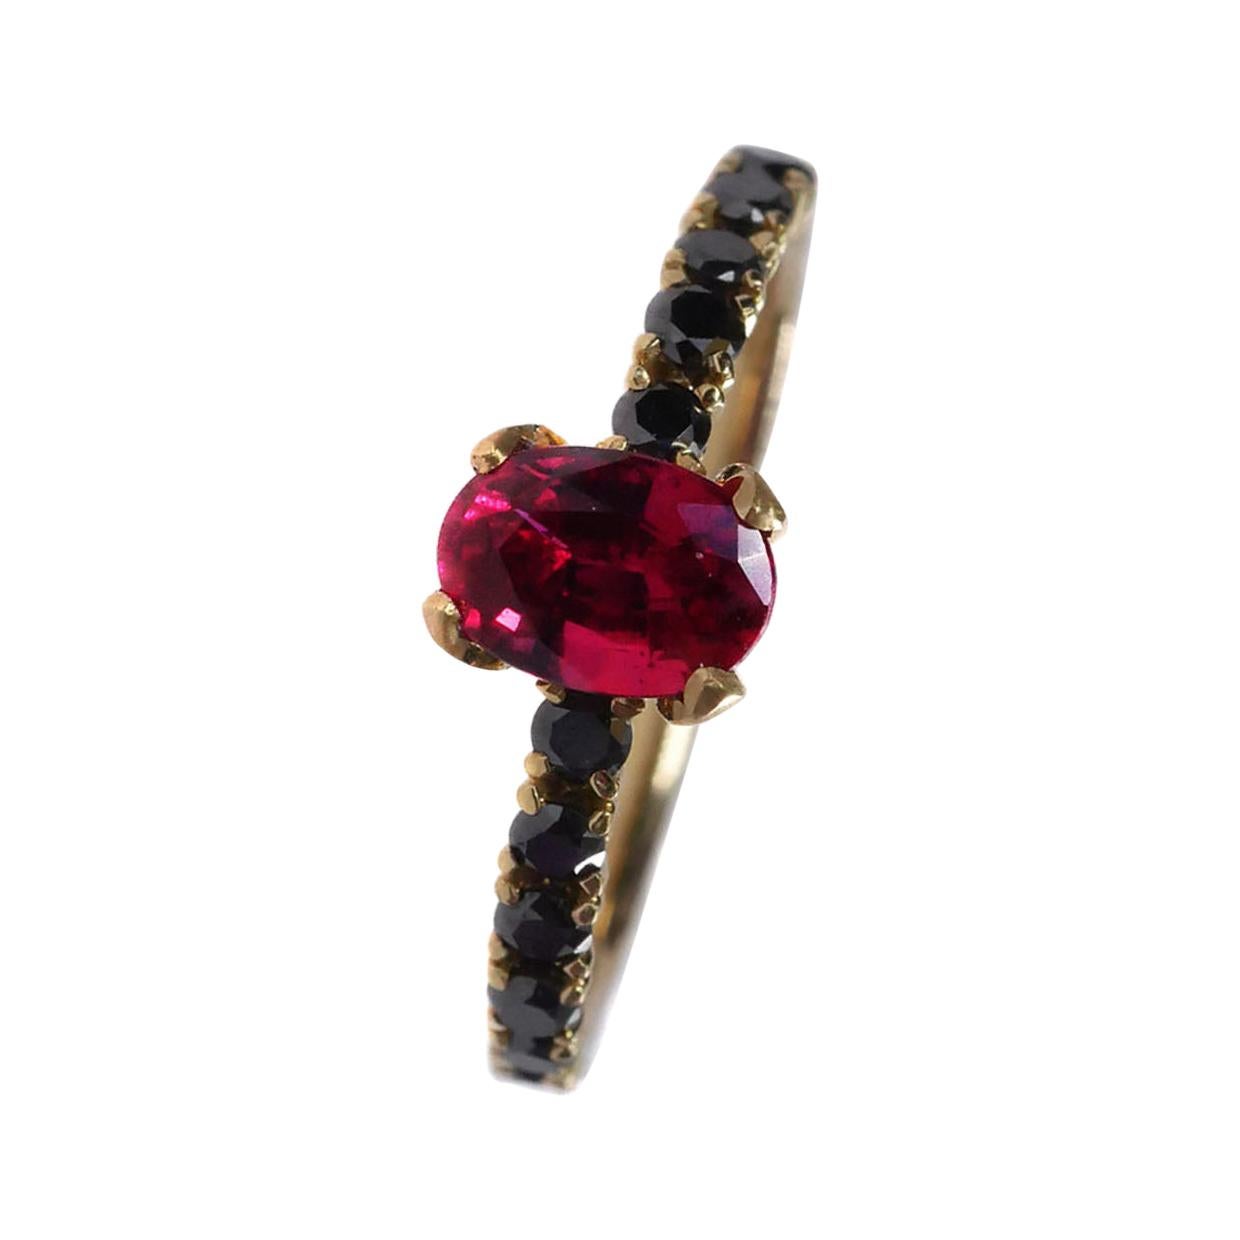 1 Carat Ruby and Black Diamonds Solitaire Ring Set in 18 Karat Yellow Gold